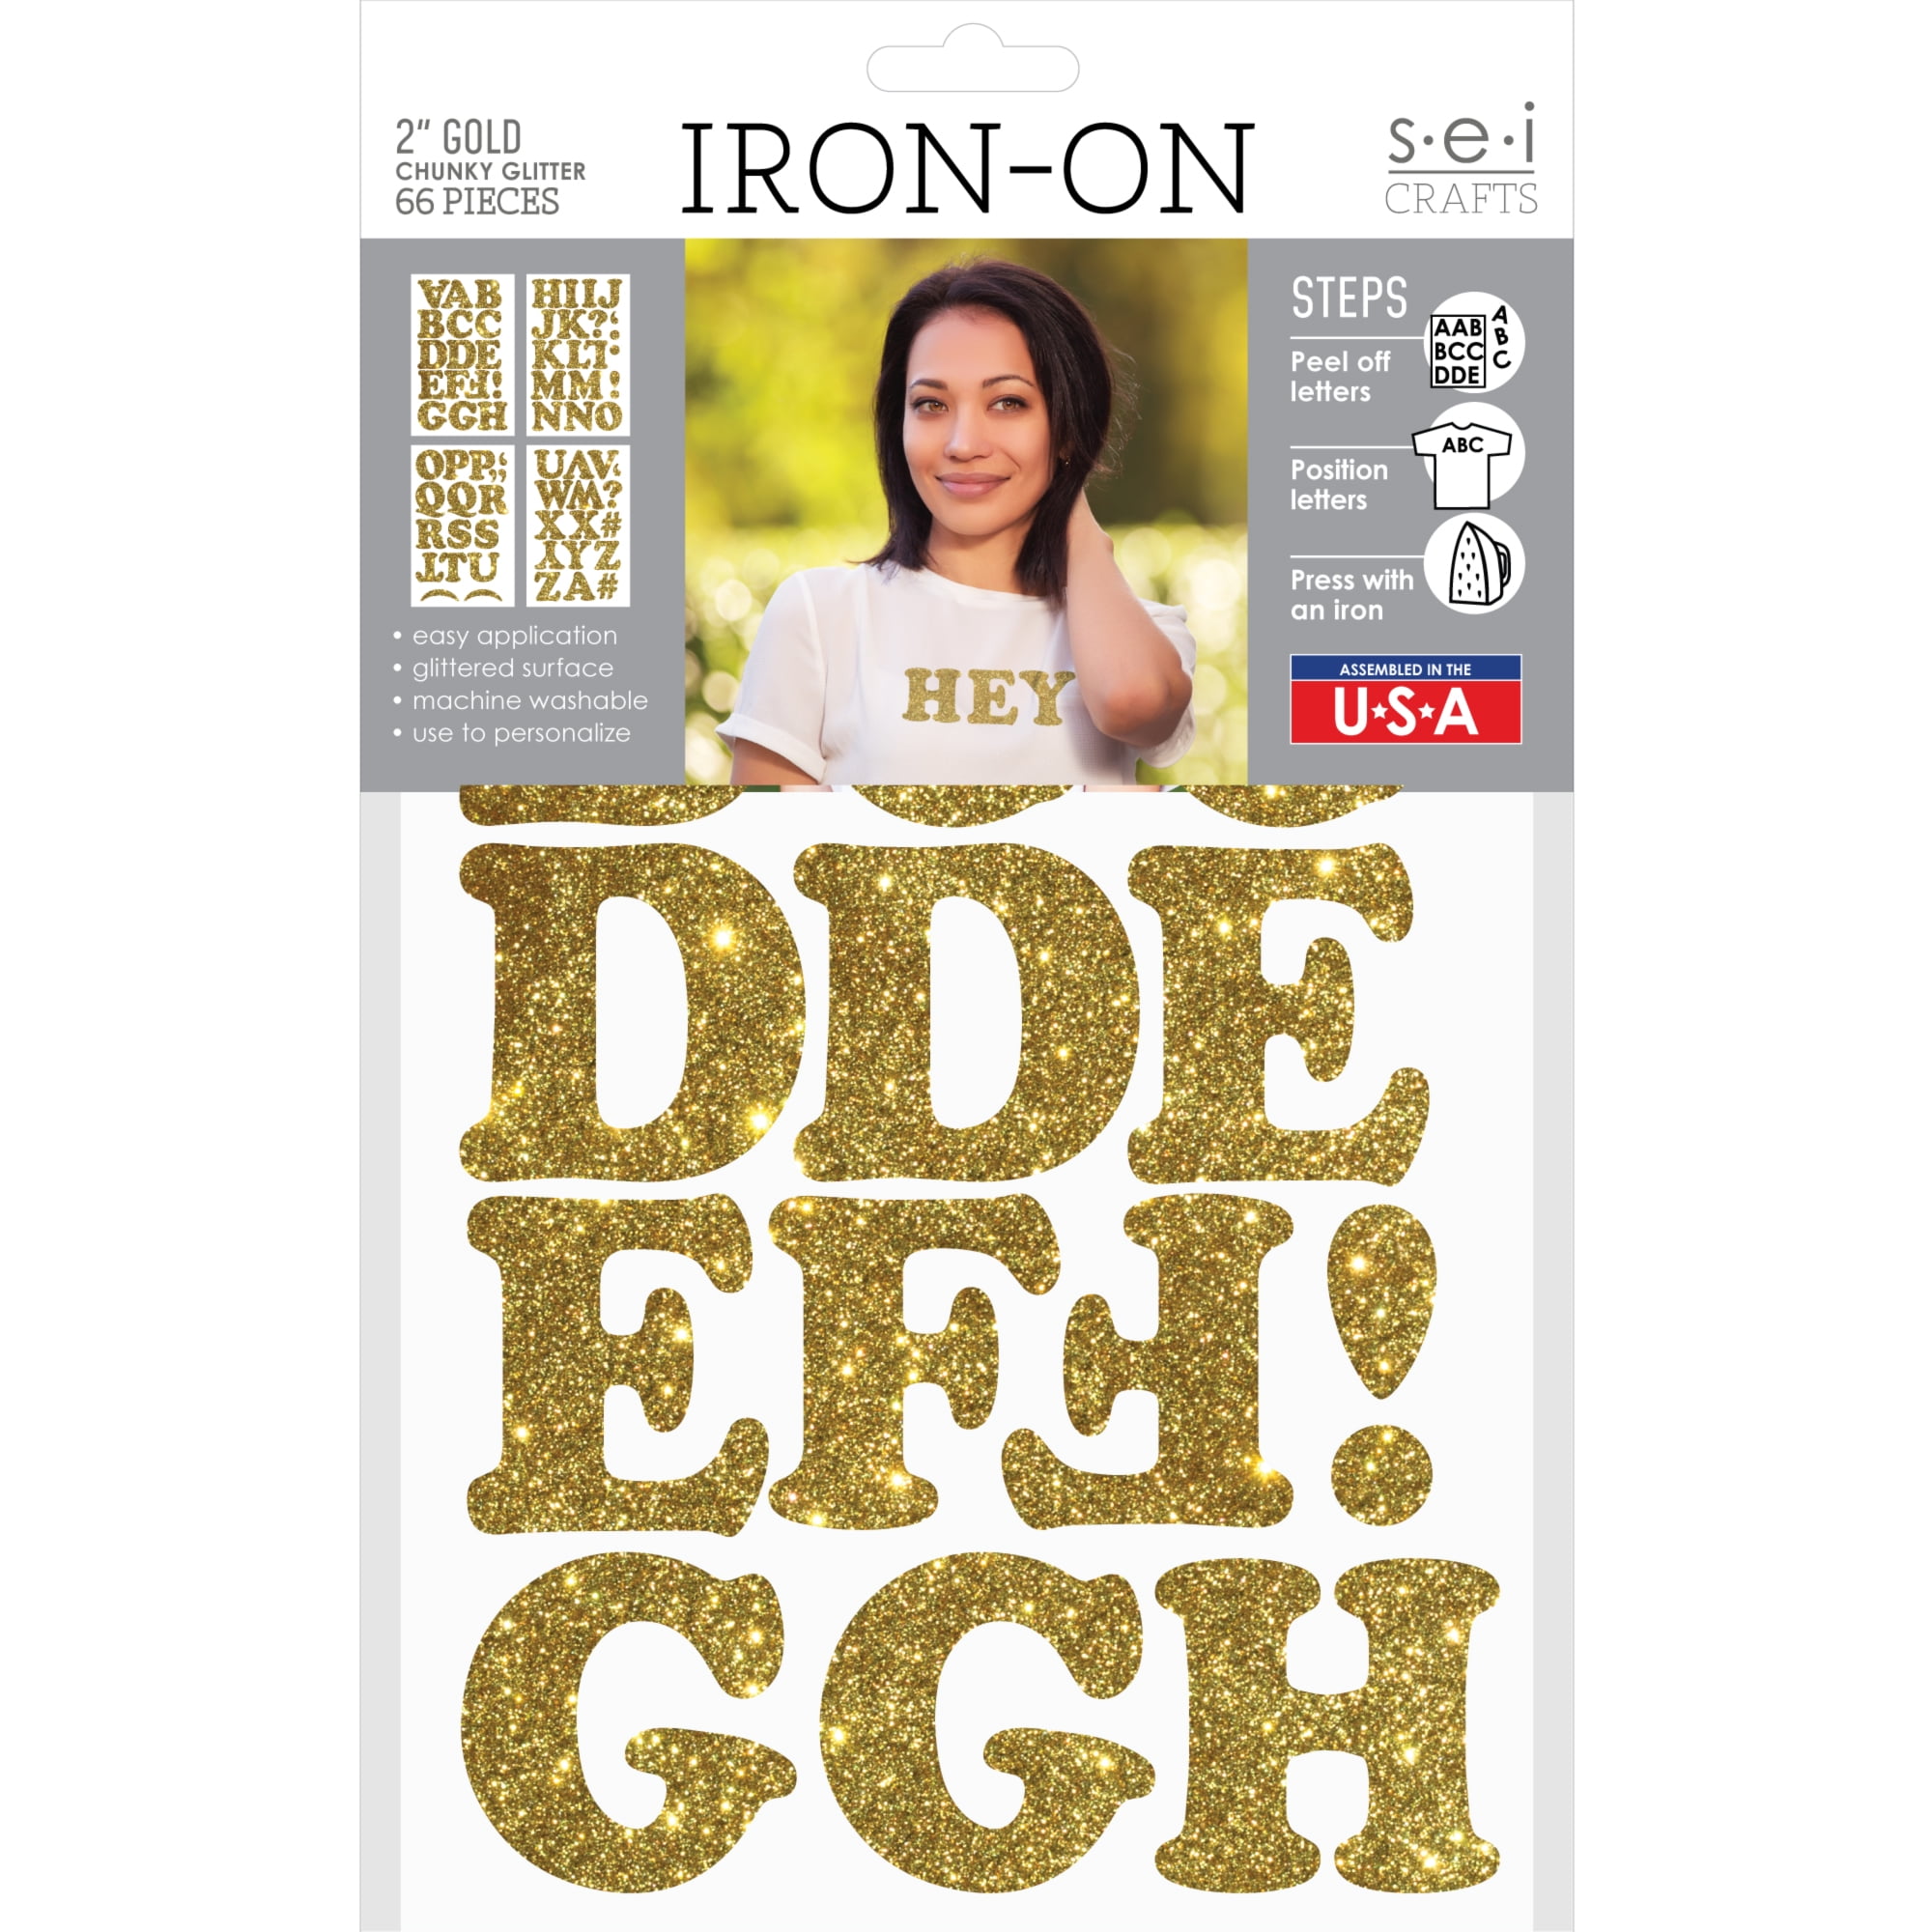 S.E.I. 2-inch Chunky Glitter Easy Iron-on Letters Transfer, Gold